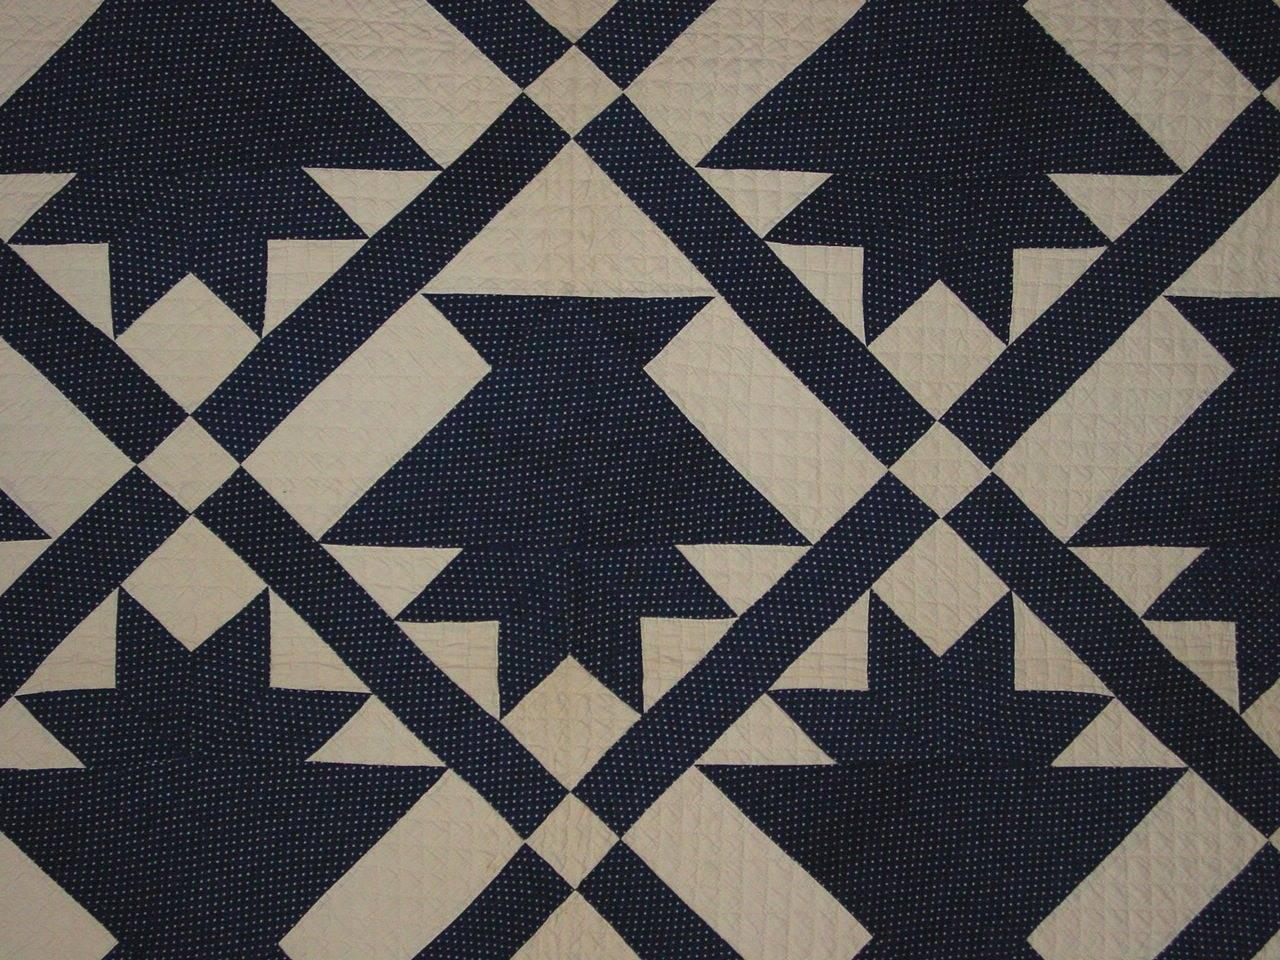 A graphic Folk Art patchwork quilt composed of blue cotton calico baskets on a white quilted ground. A cloth label at bottom left corner reads 